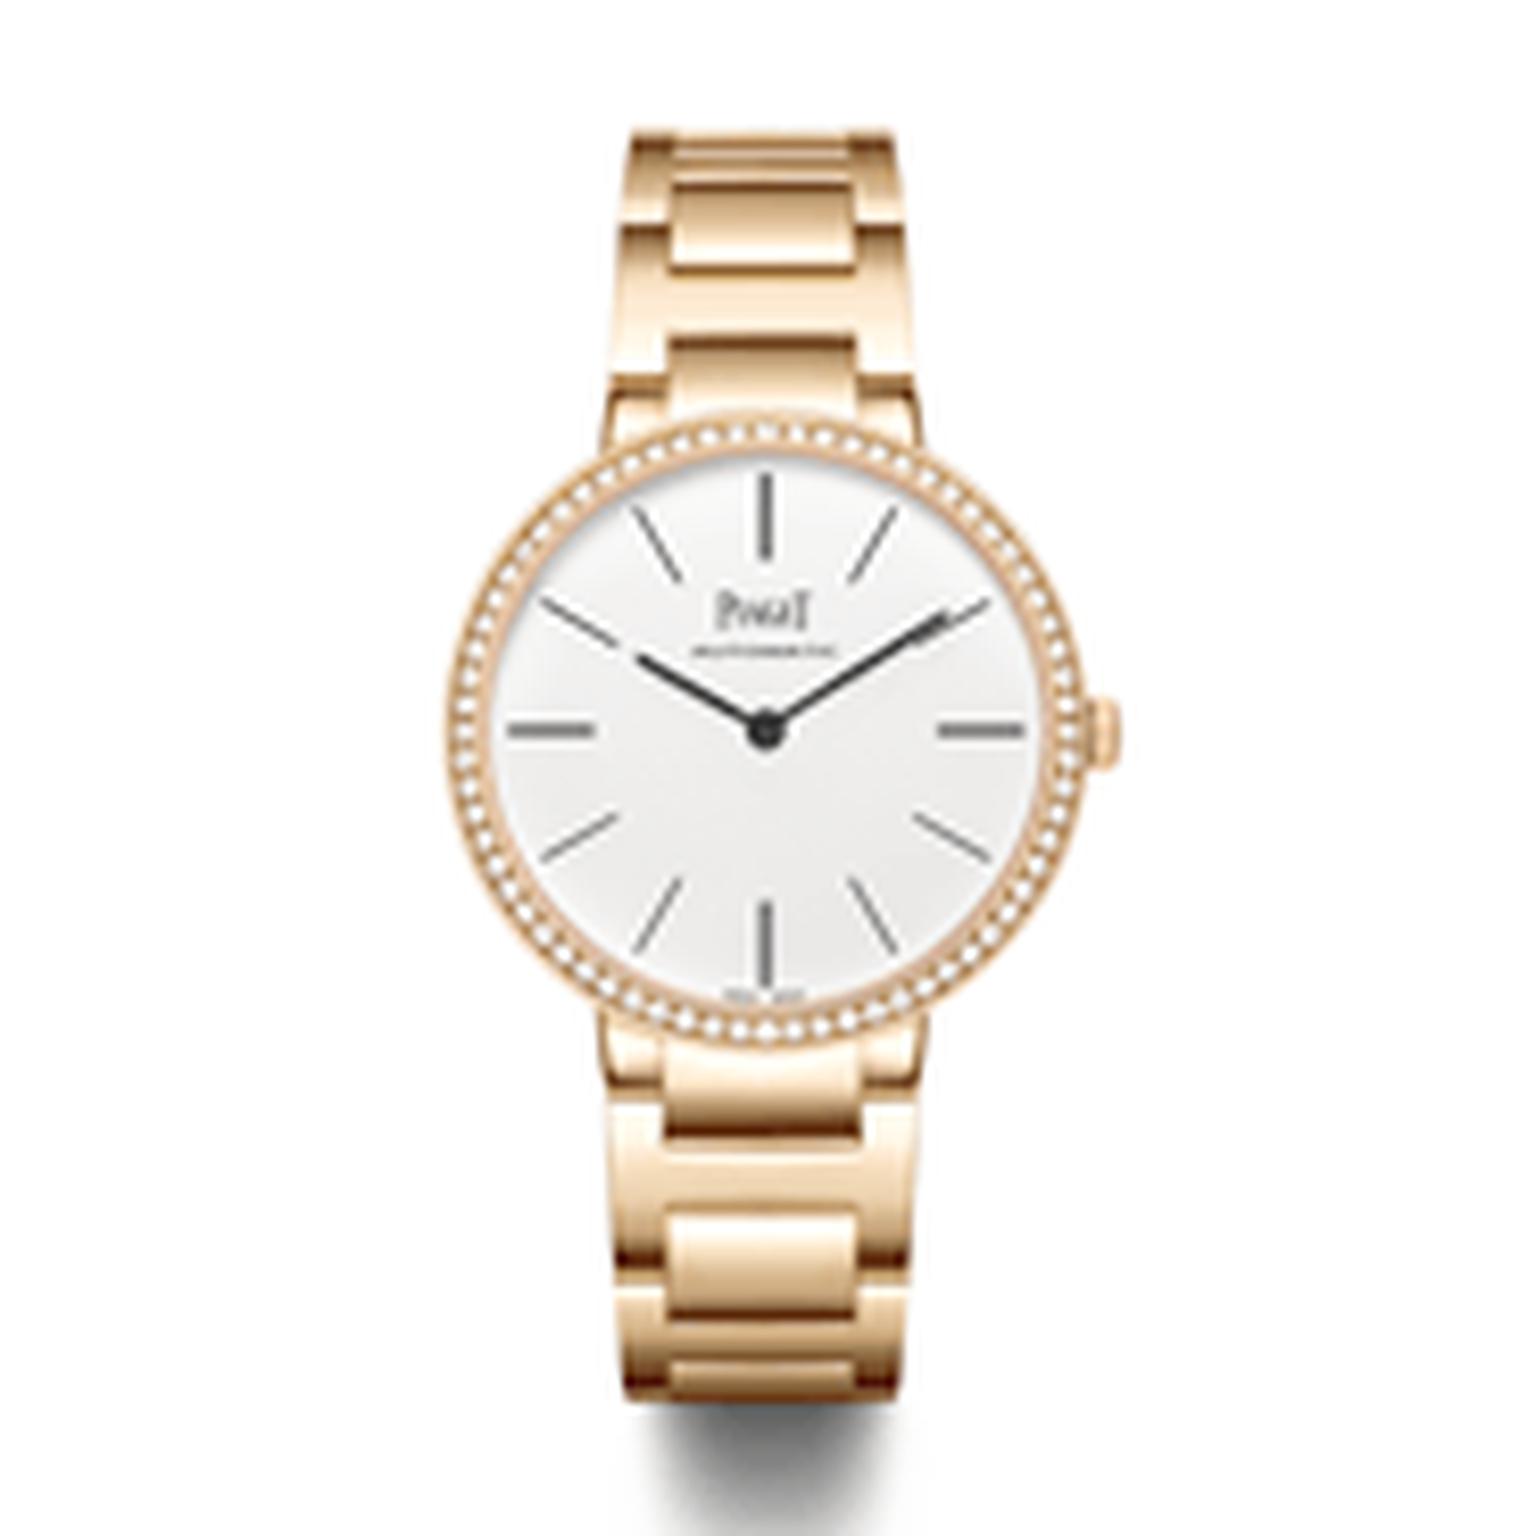 Piaget Altiplano watch rose gold bracelet with diamonds_thumb